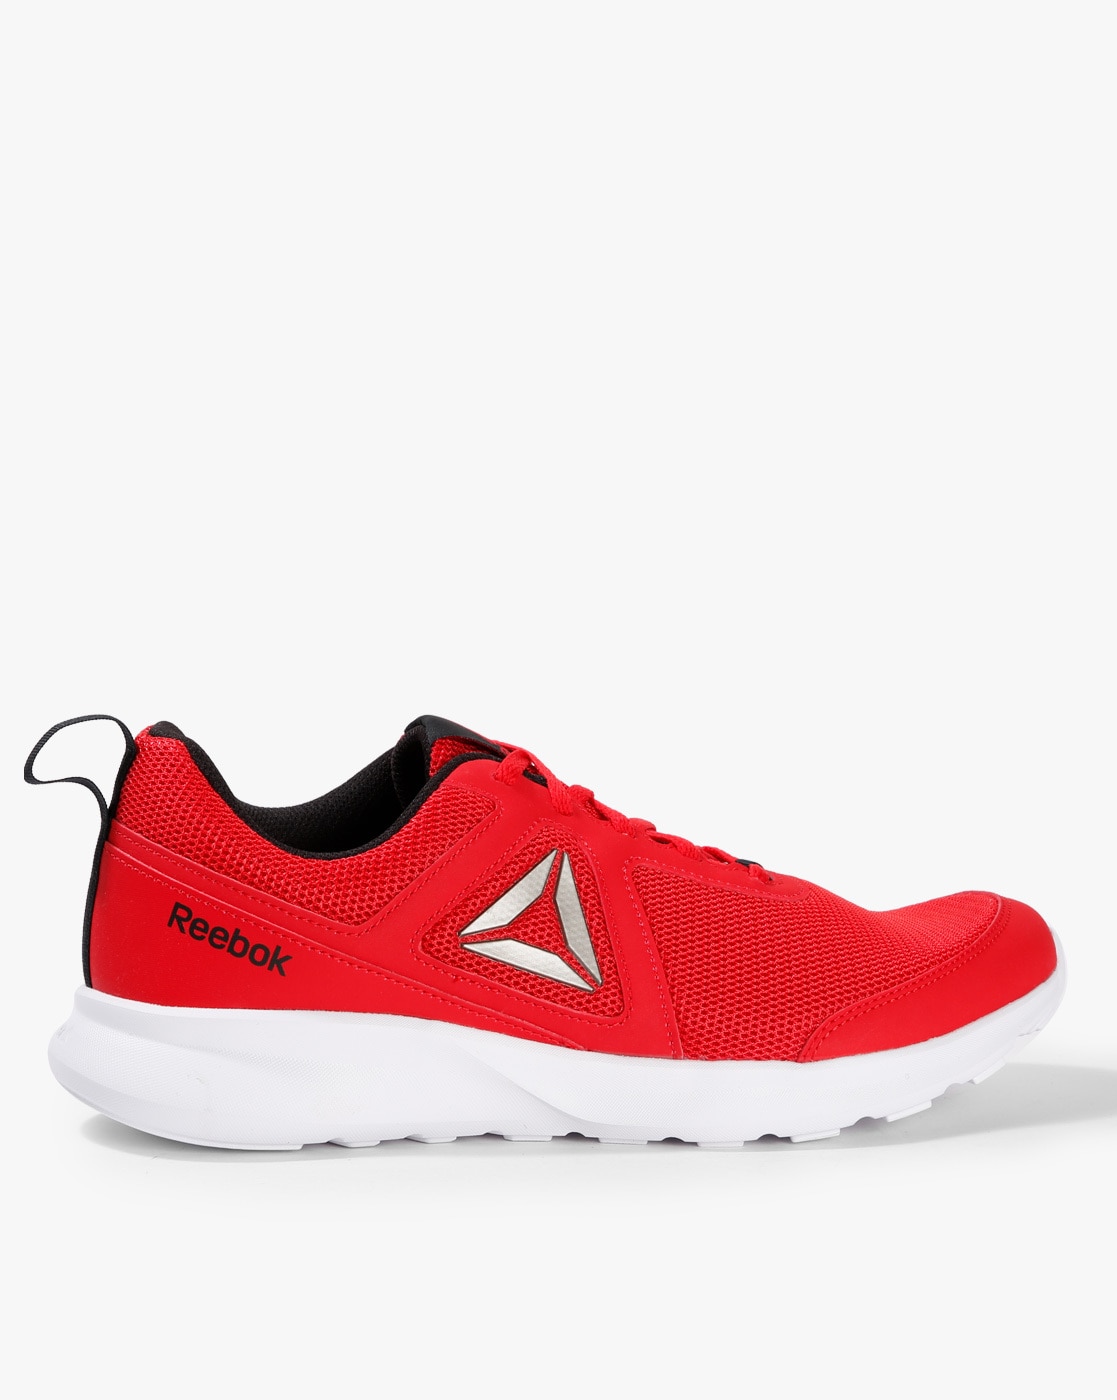 Selling - reebok red sports shoes - OFF 